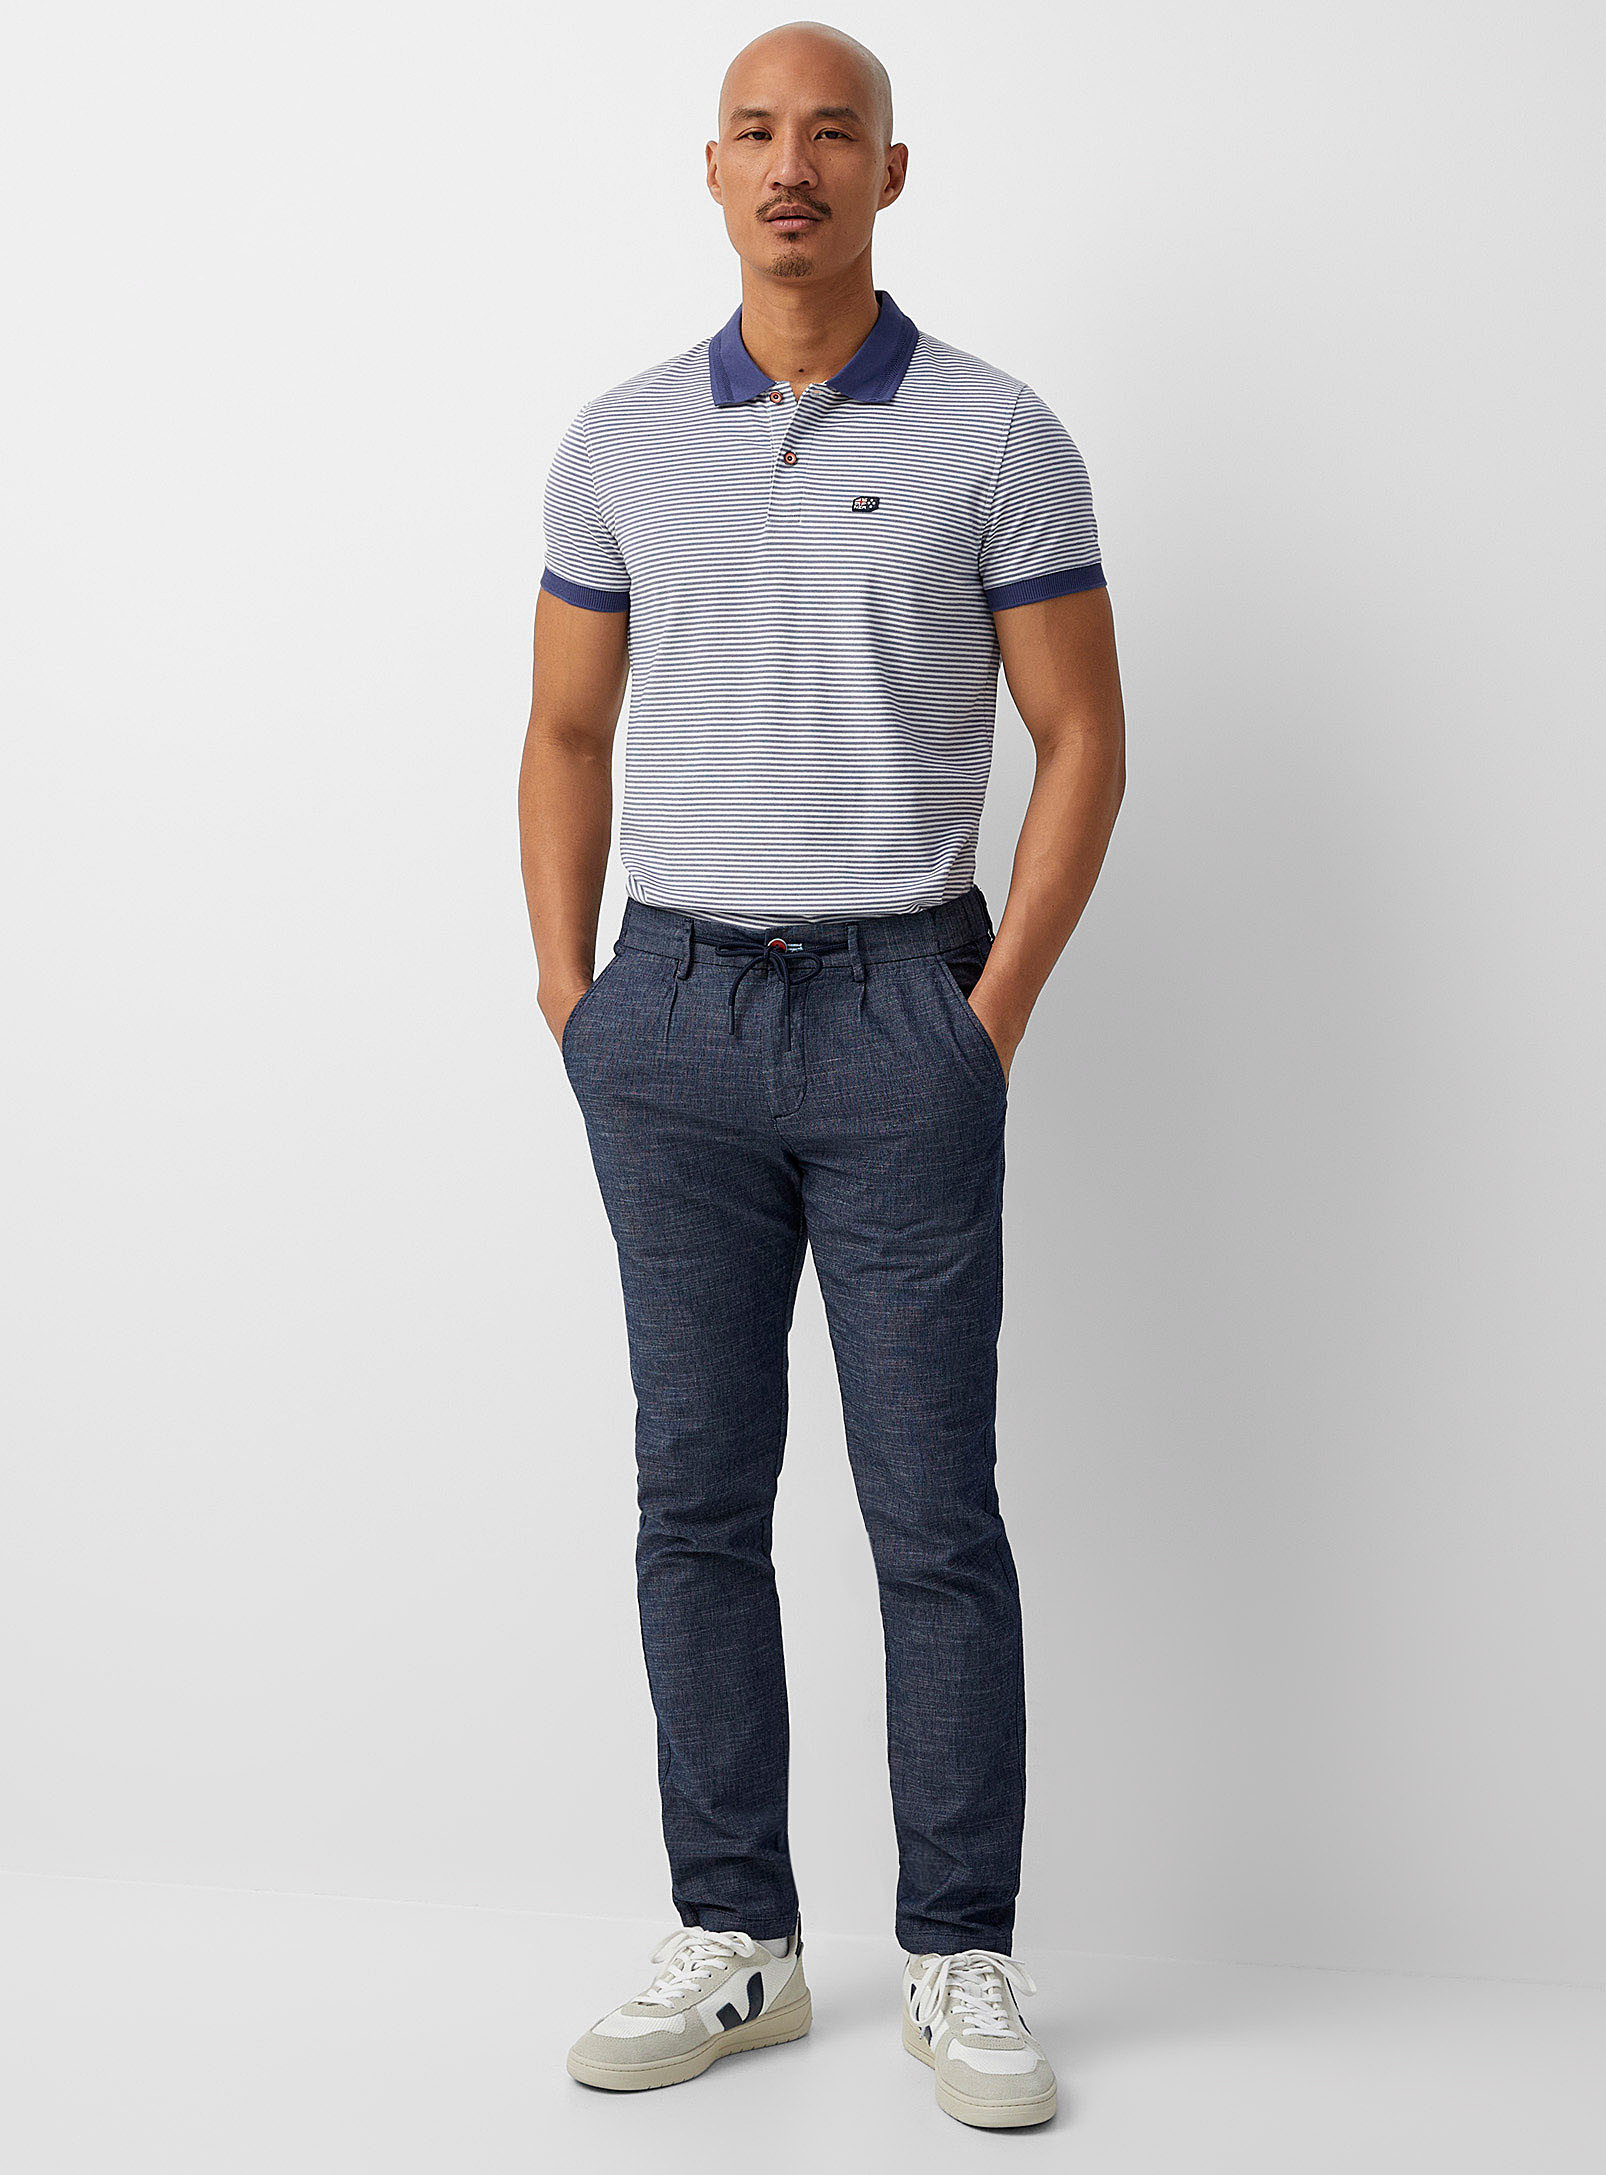 New Zealand Auckland - Le pantalon chambray taille confort